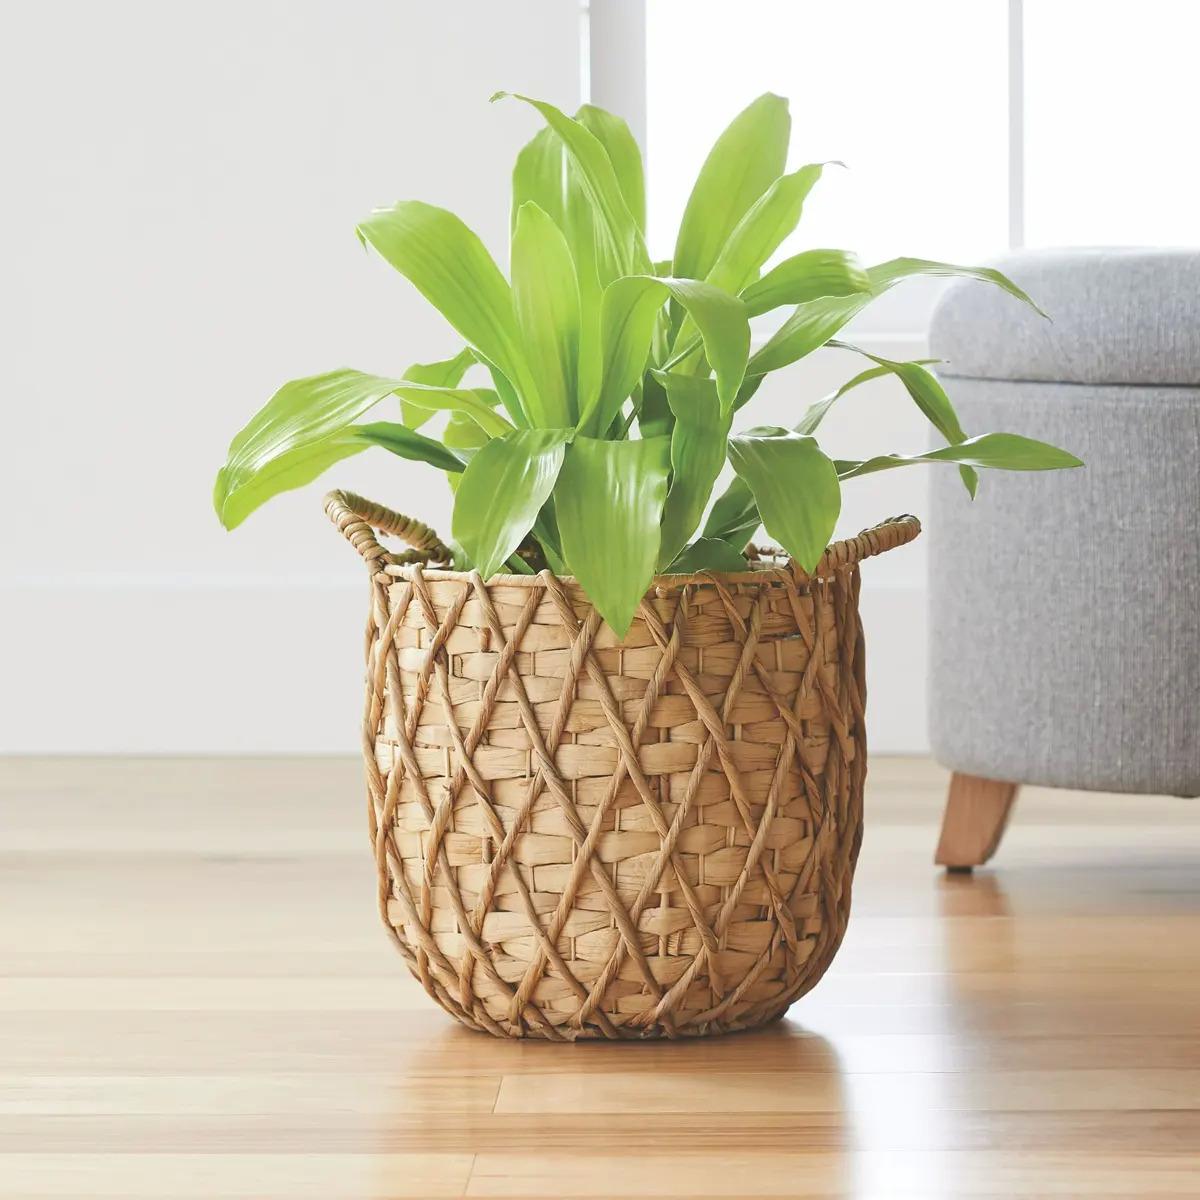 Better Homes and Gardens Basket Planter for $9.94